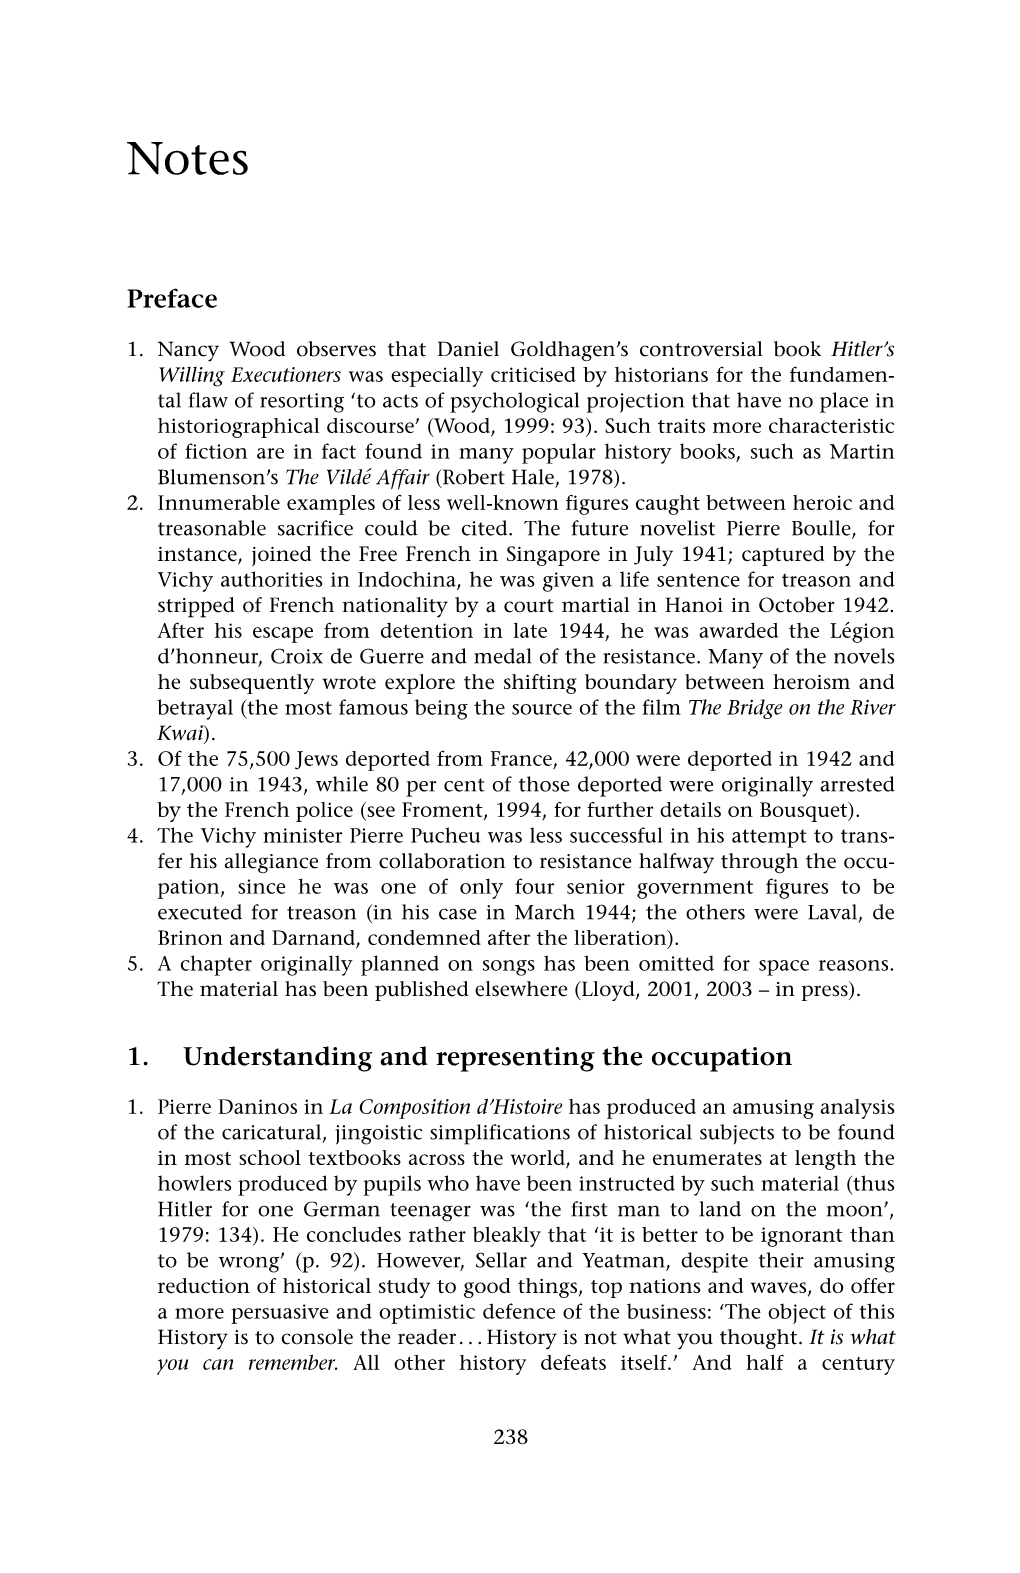 Preface 1. Understanding and Representing the Occupation